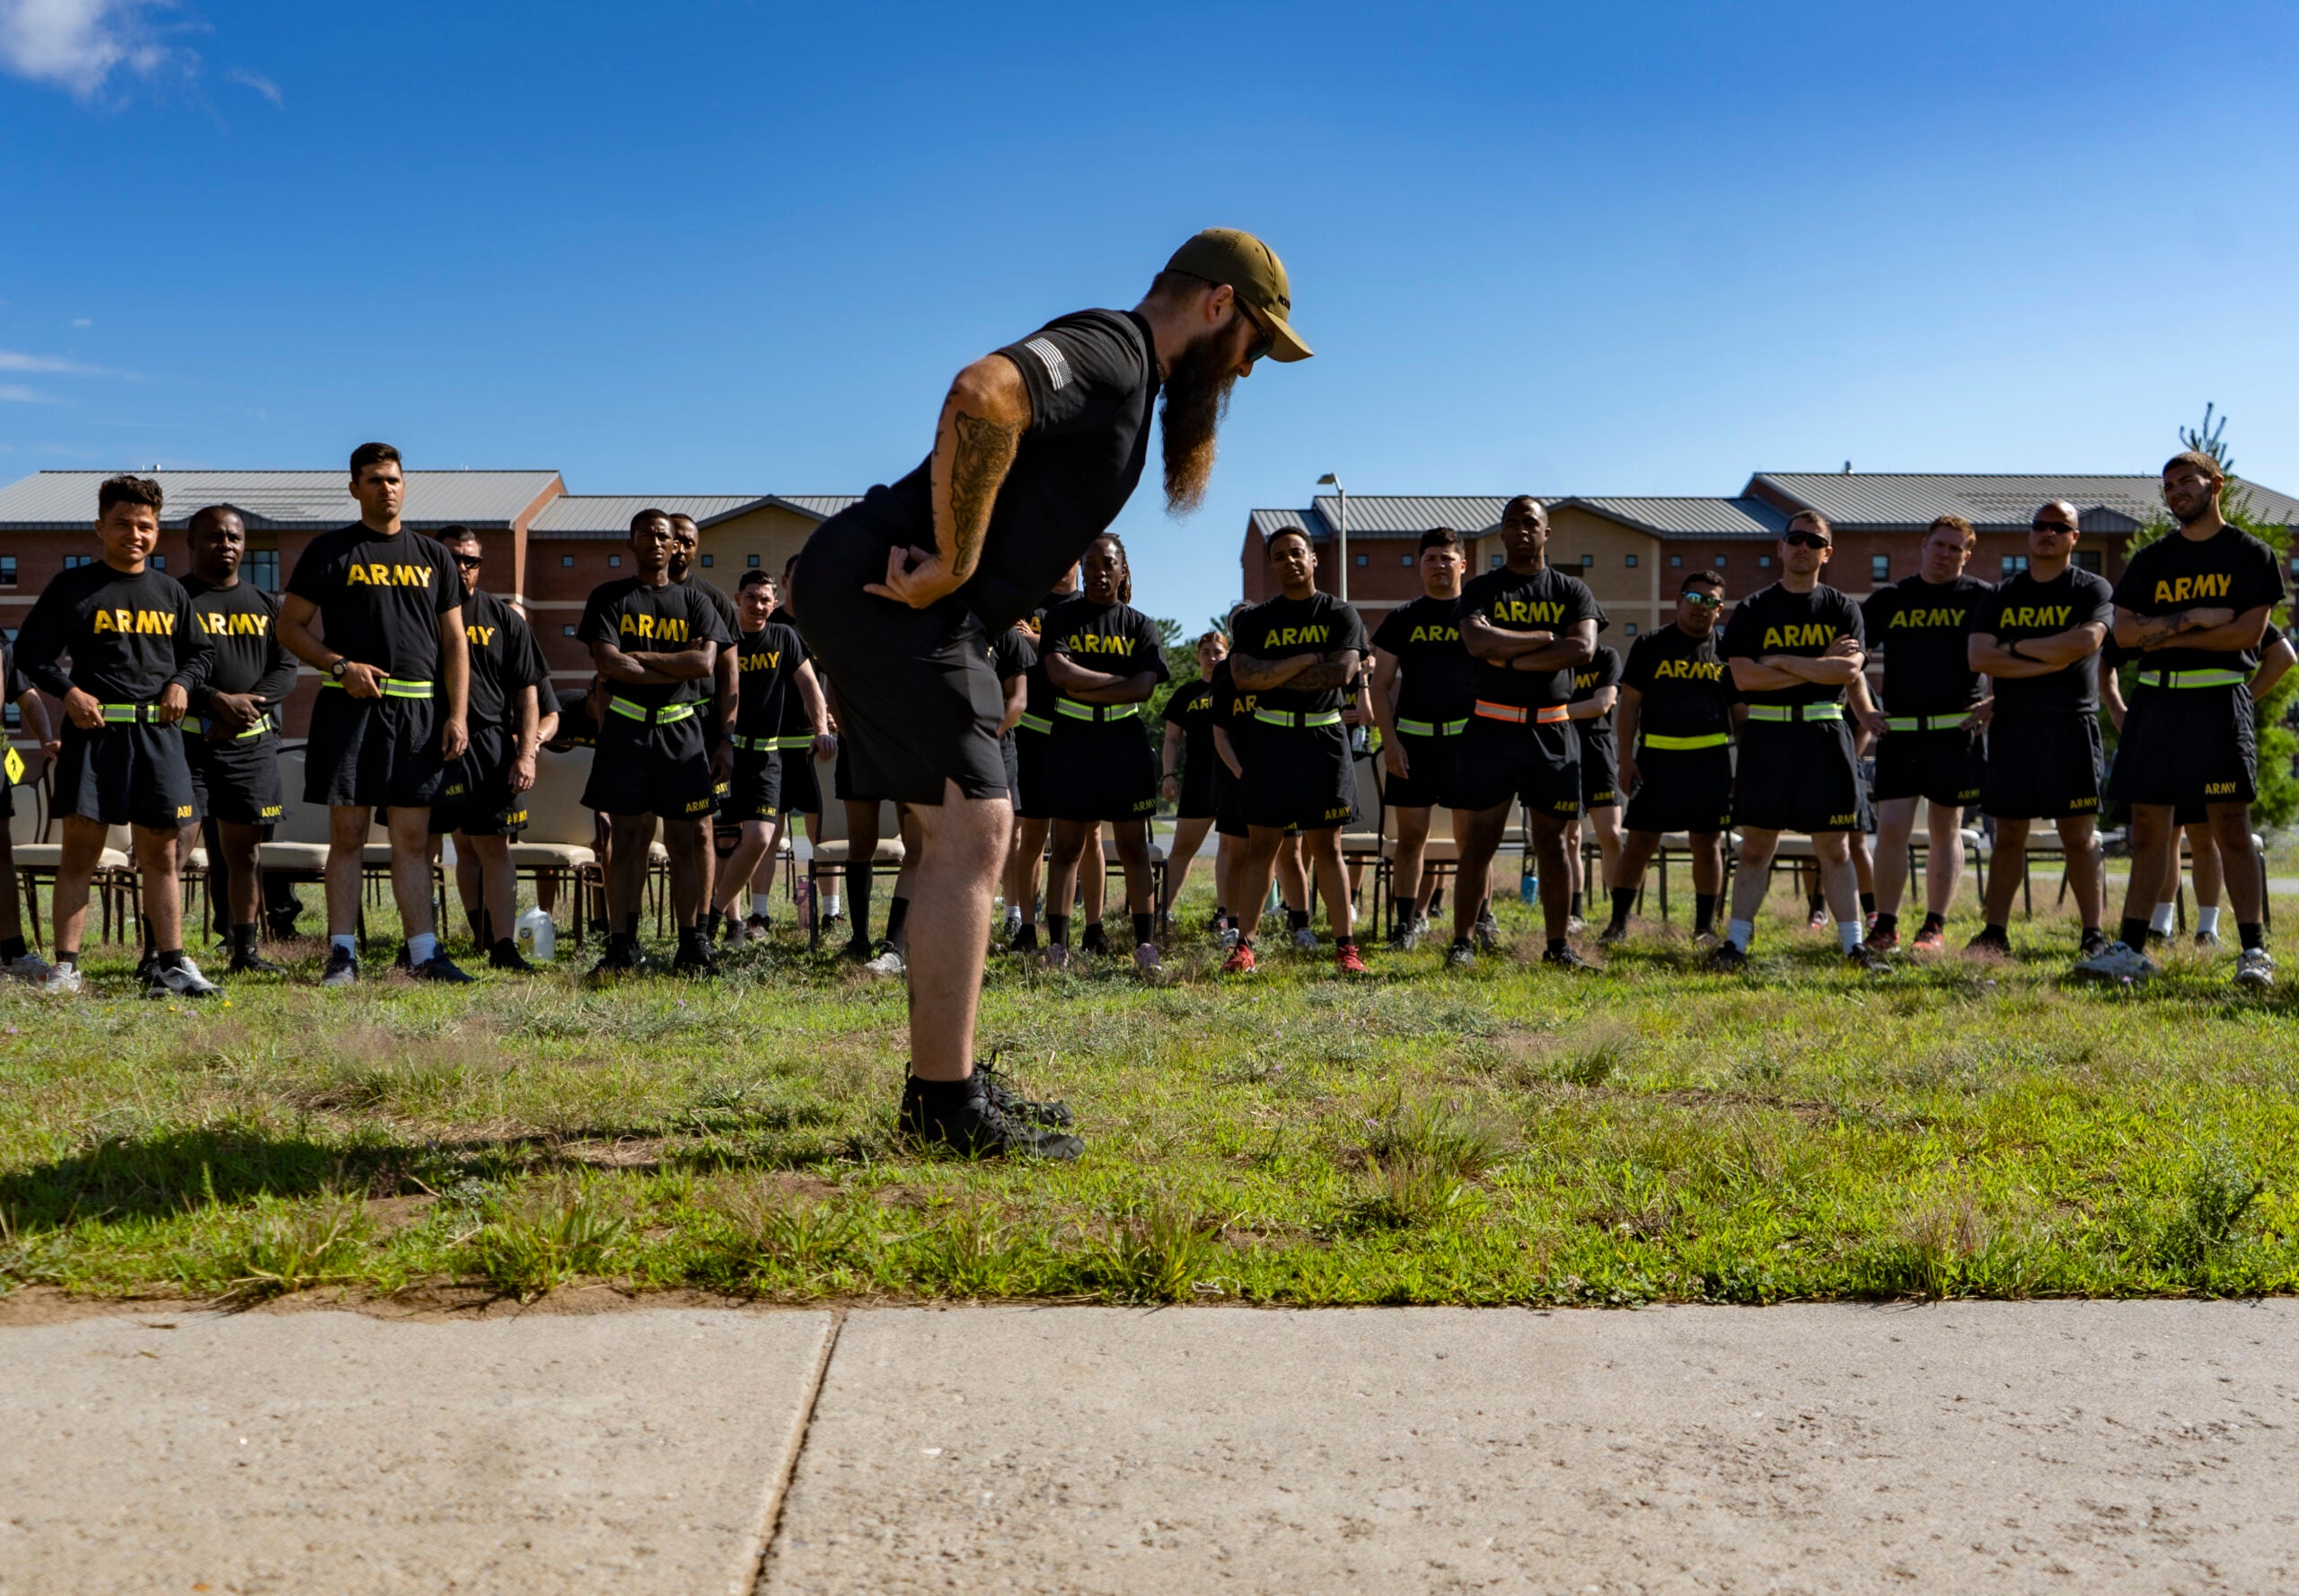 The Army’s new pre-basic-training boot camp might actually build better soldiers